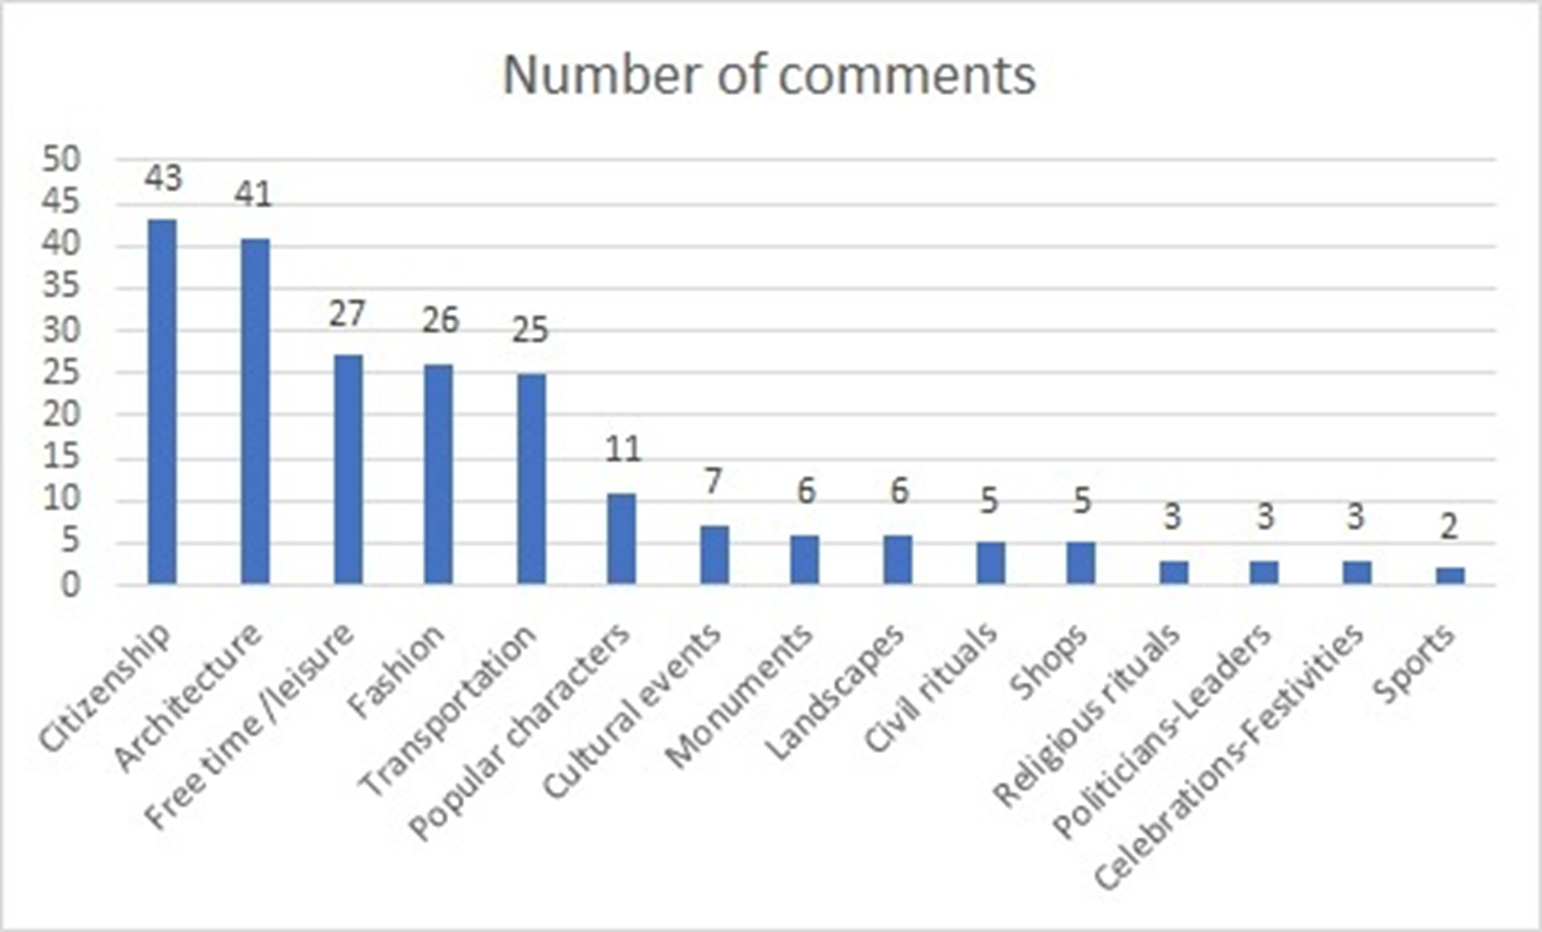 Themes of the publications that have obtained the highest number of comments